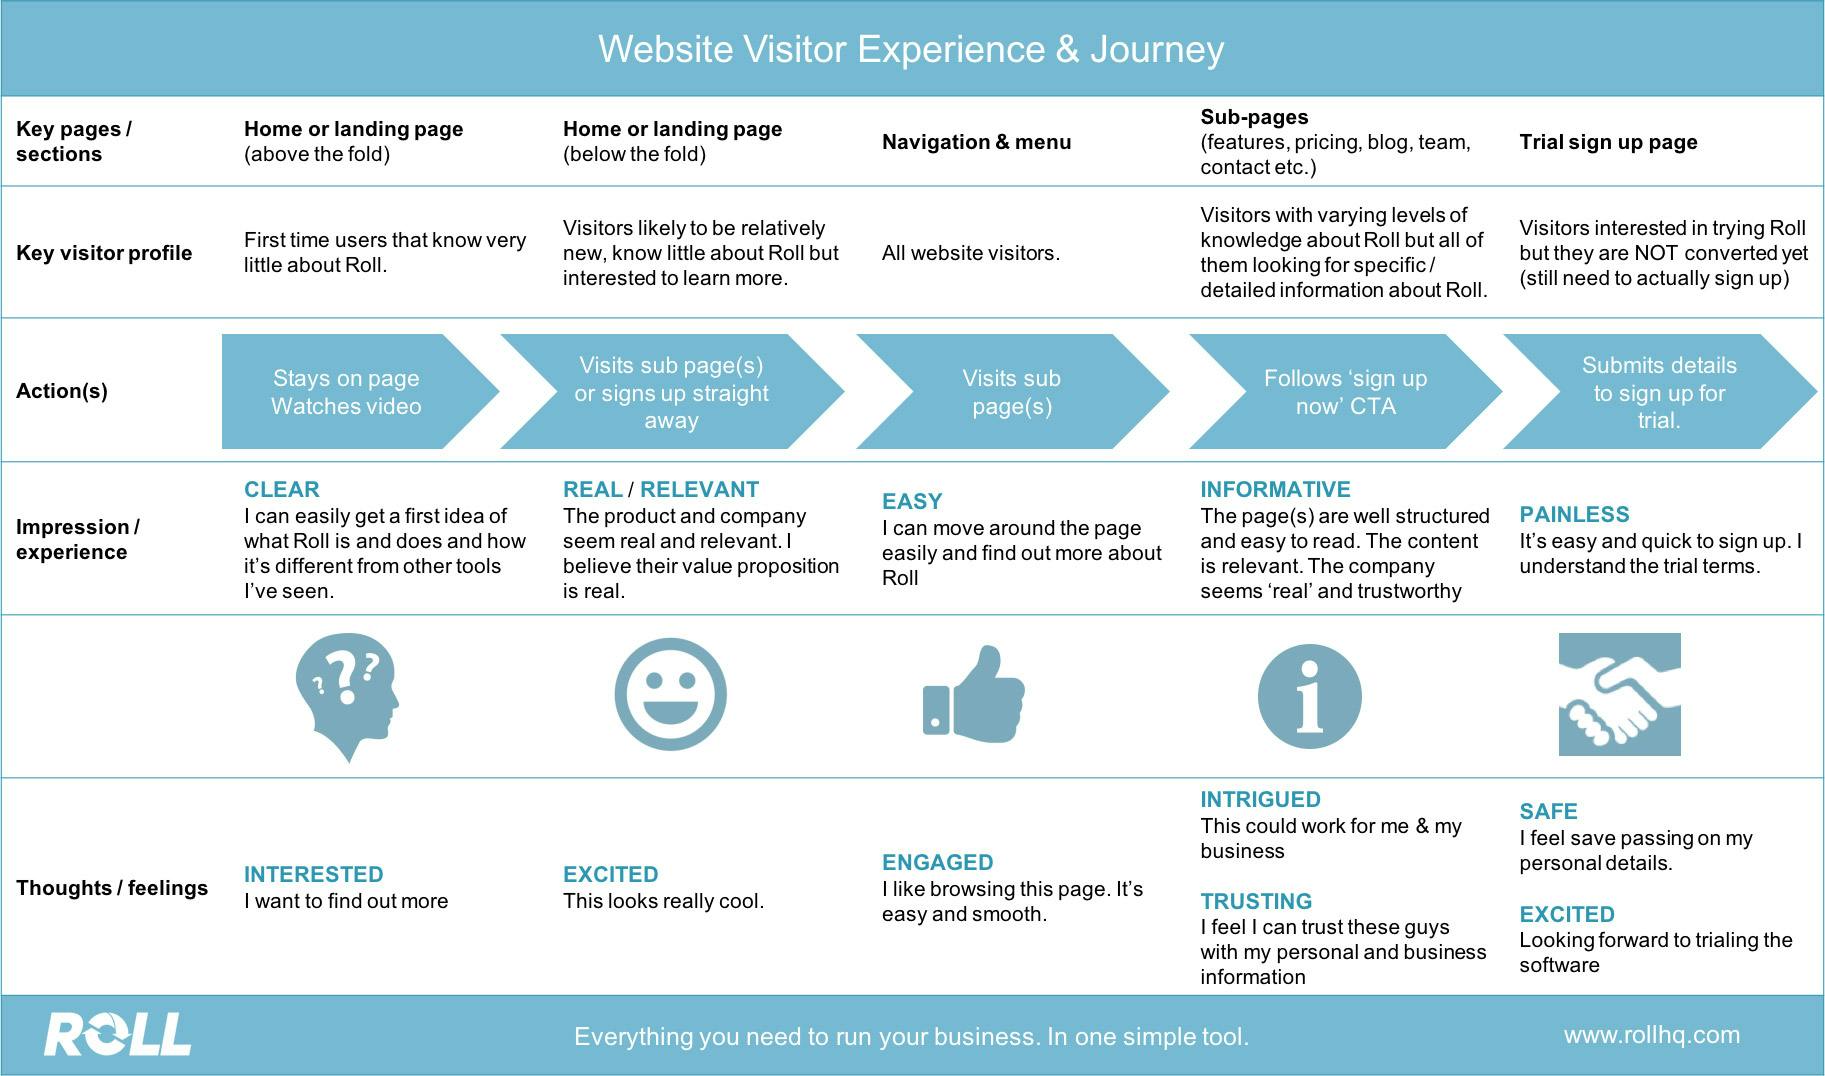 Website visitor experience and journey flow chart